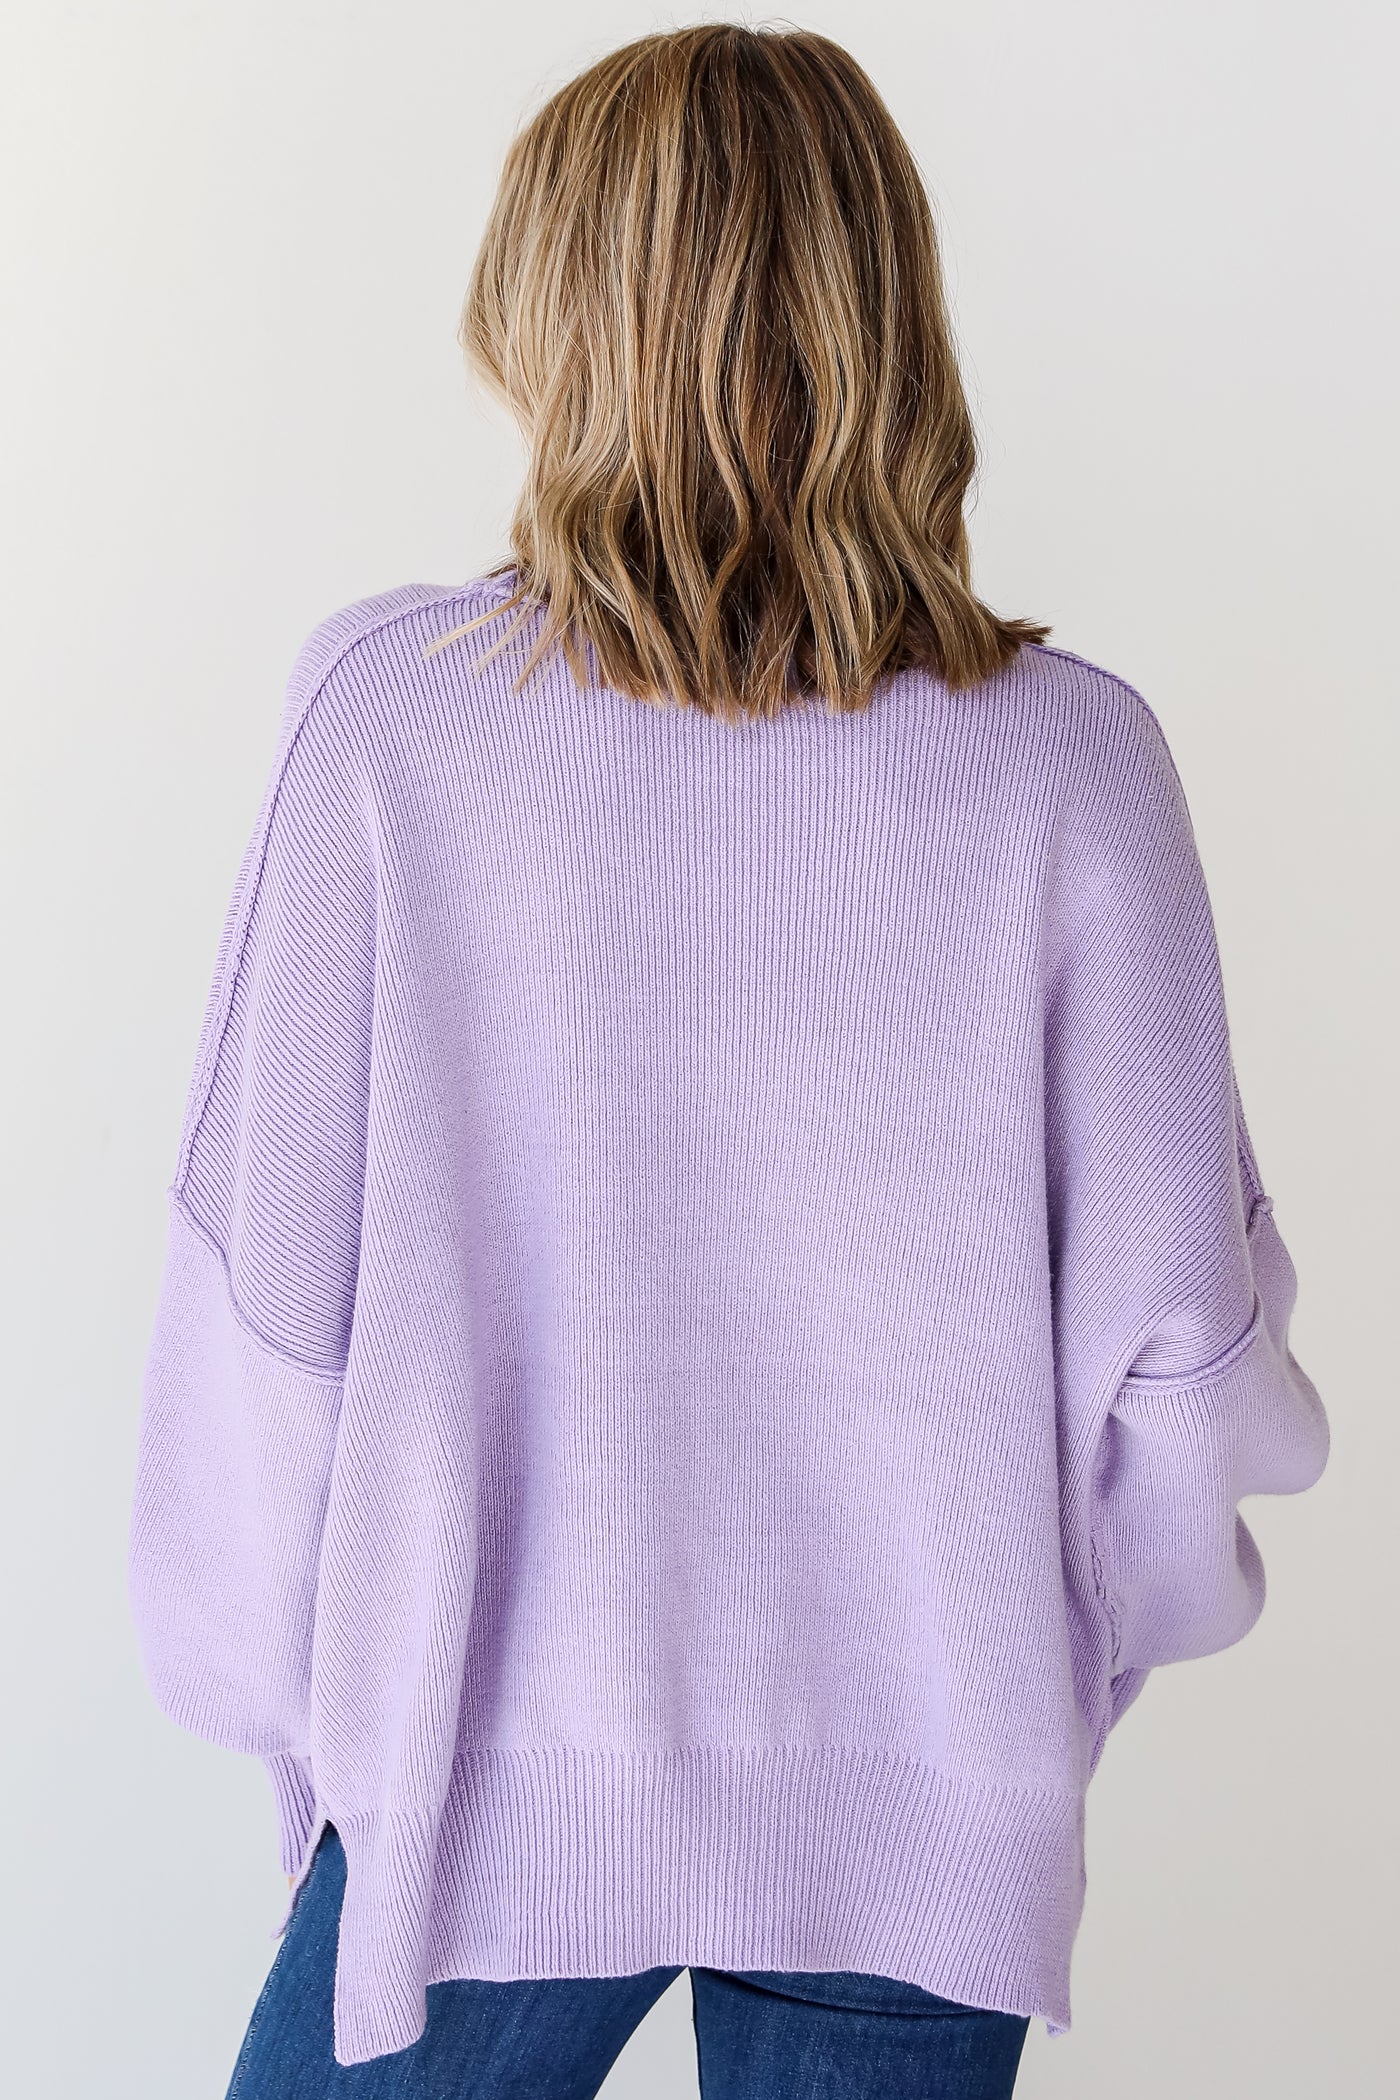 lavender oversized sweater back view